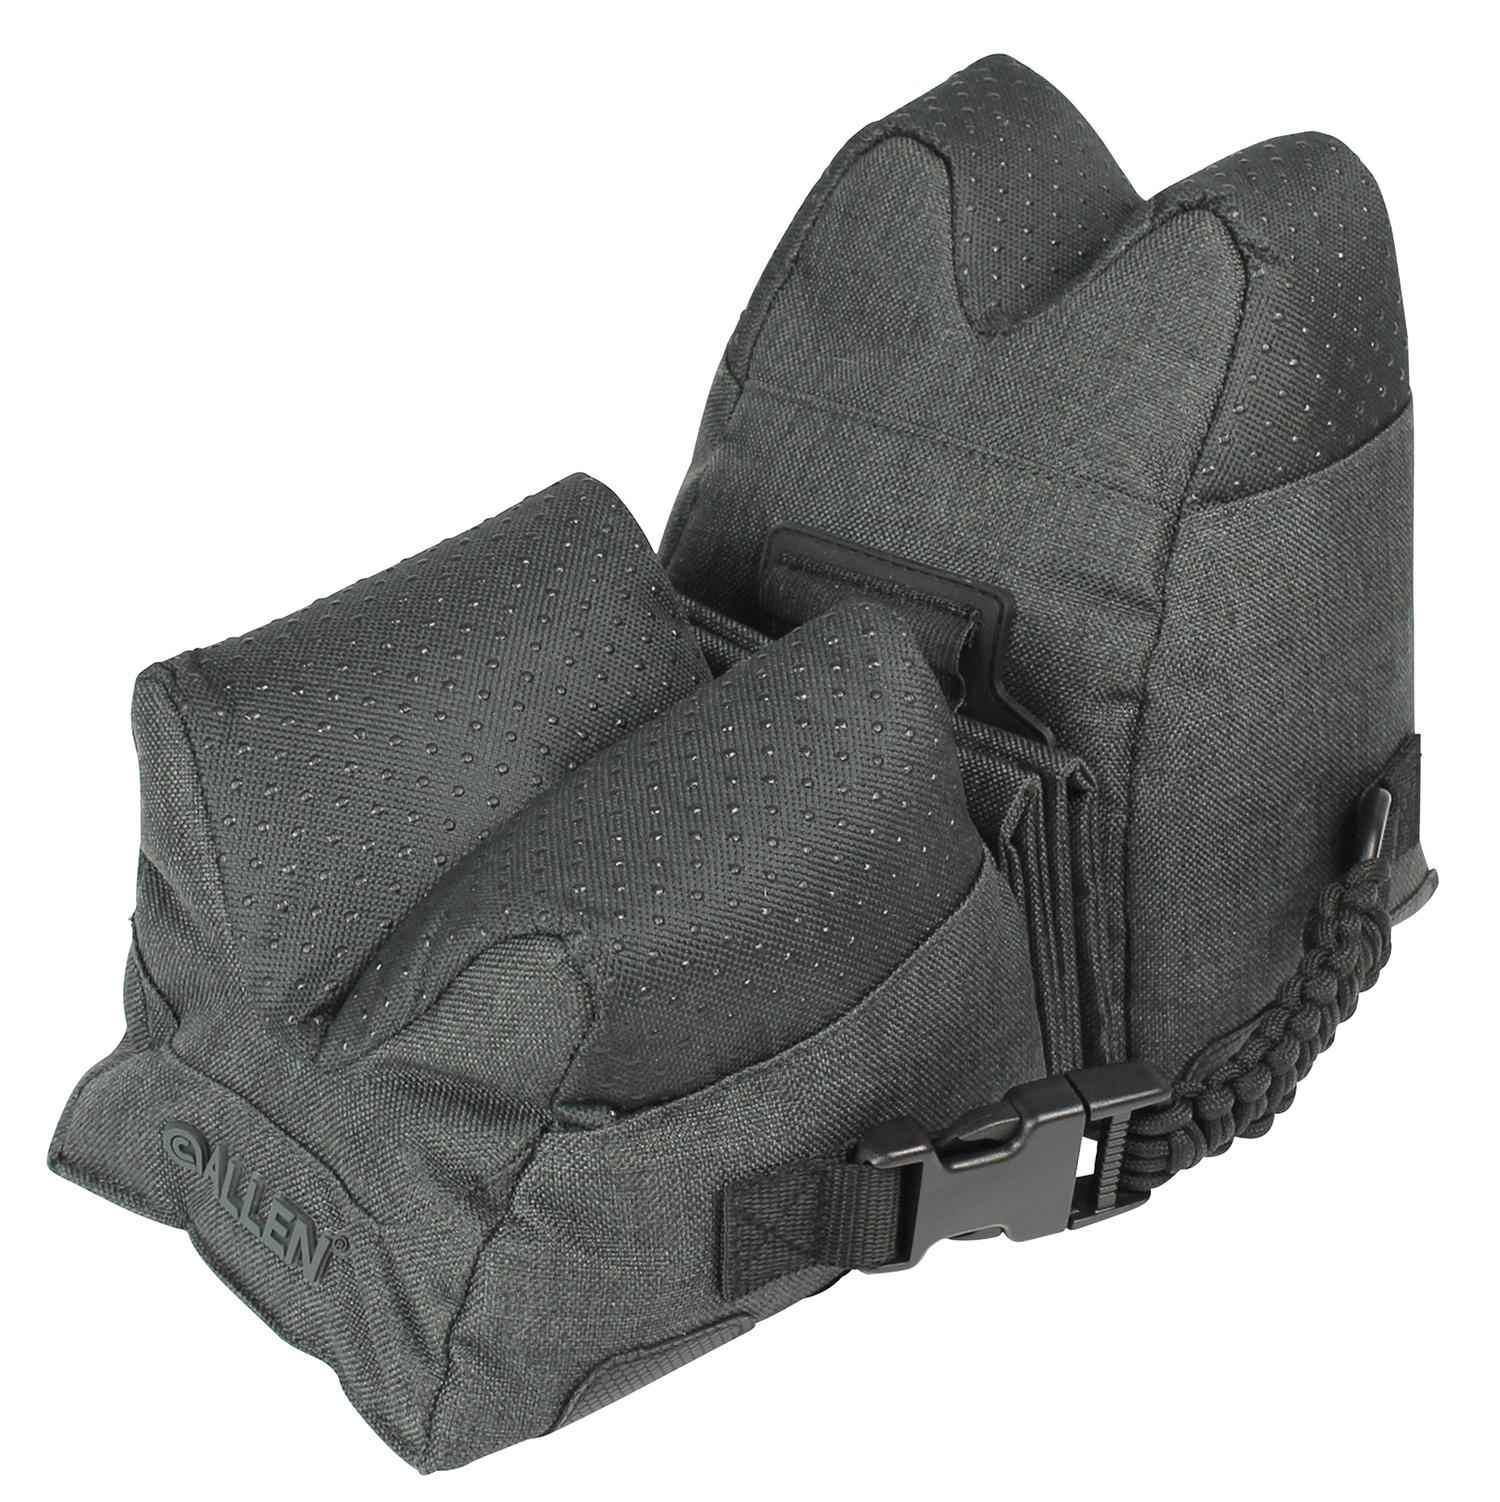 Allen 18415 Eliminator Shooting Rest Prefilled, Connected Style Front and Rear Bag made of Gray Polyester, weighs 9.50 lbs, 26